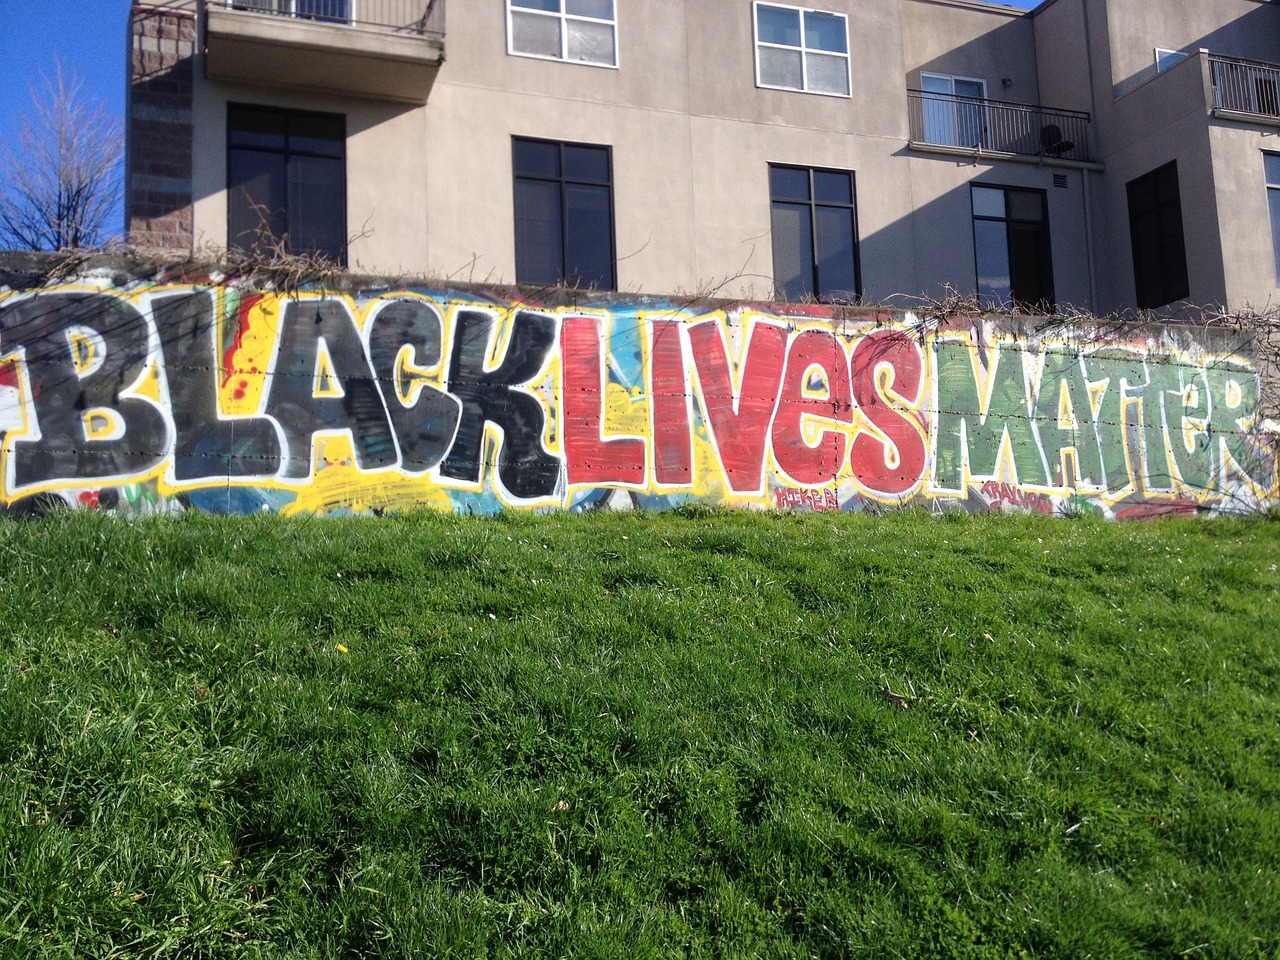 Black Lives Matter: A Guide to Resources